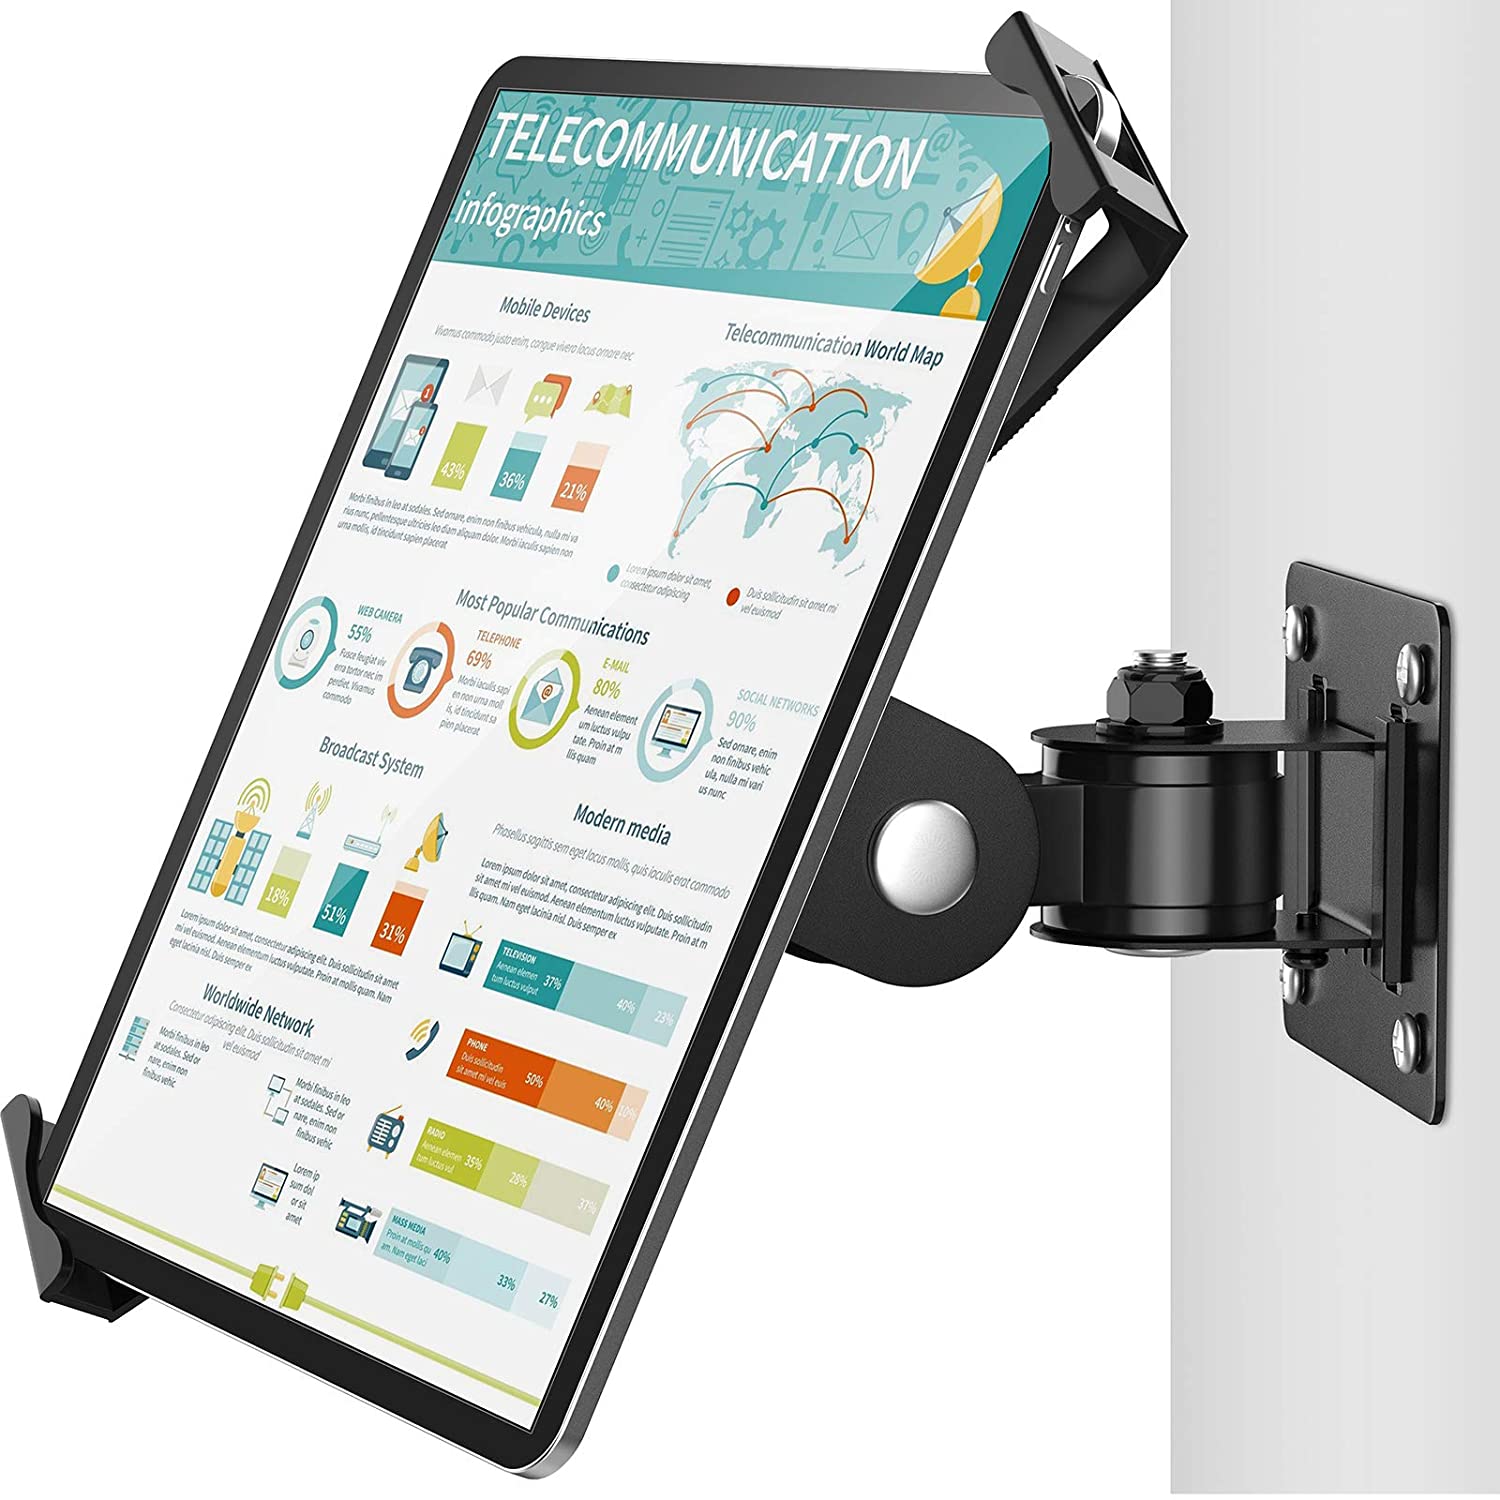 AboveTEK Tablet Wall Mount - Fits 7 to 11 Inch Tablets Including iPad, Galaxy Tab, Slate, Fire and More-Anti Theft Security Lock and Key - Articulating Swivel Holder for Portrait and Landscape(Black).